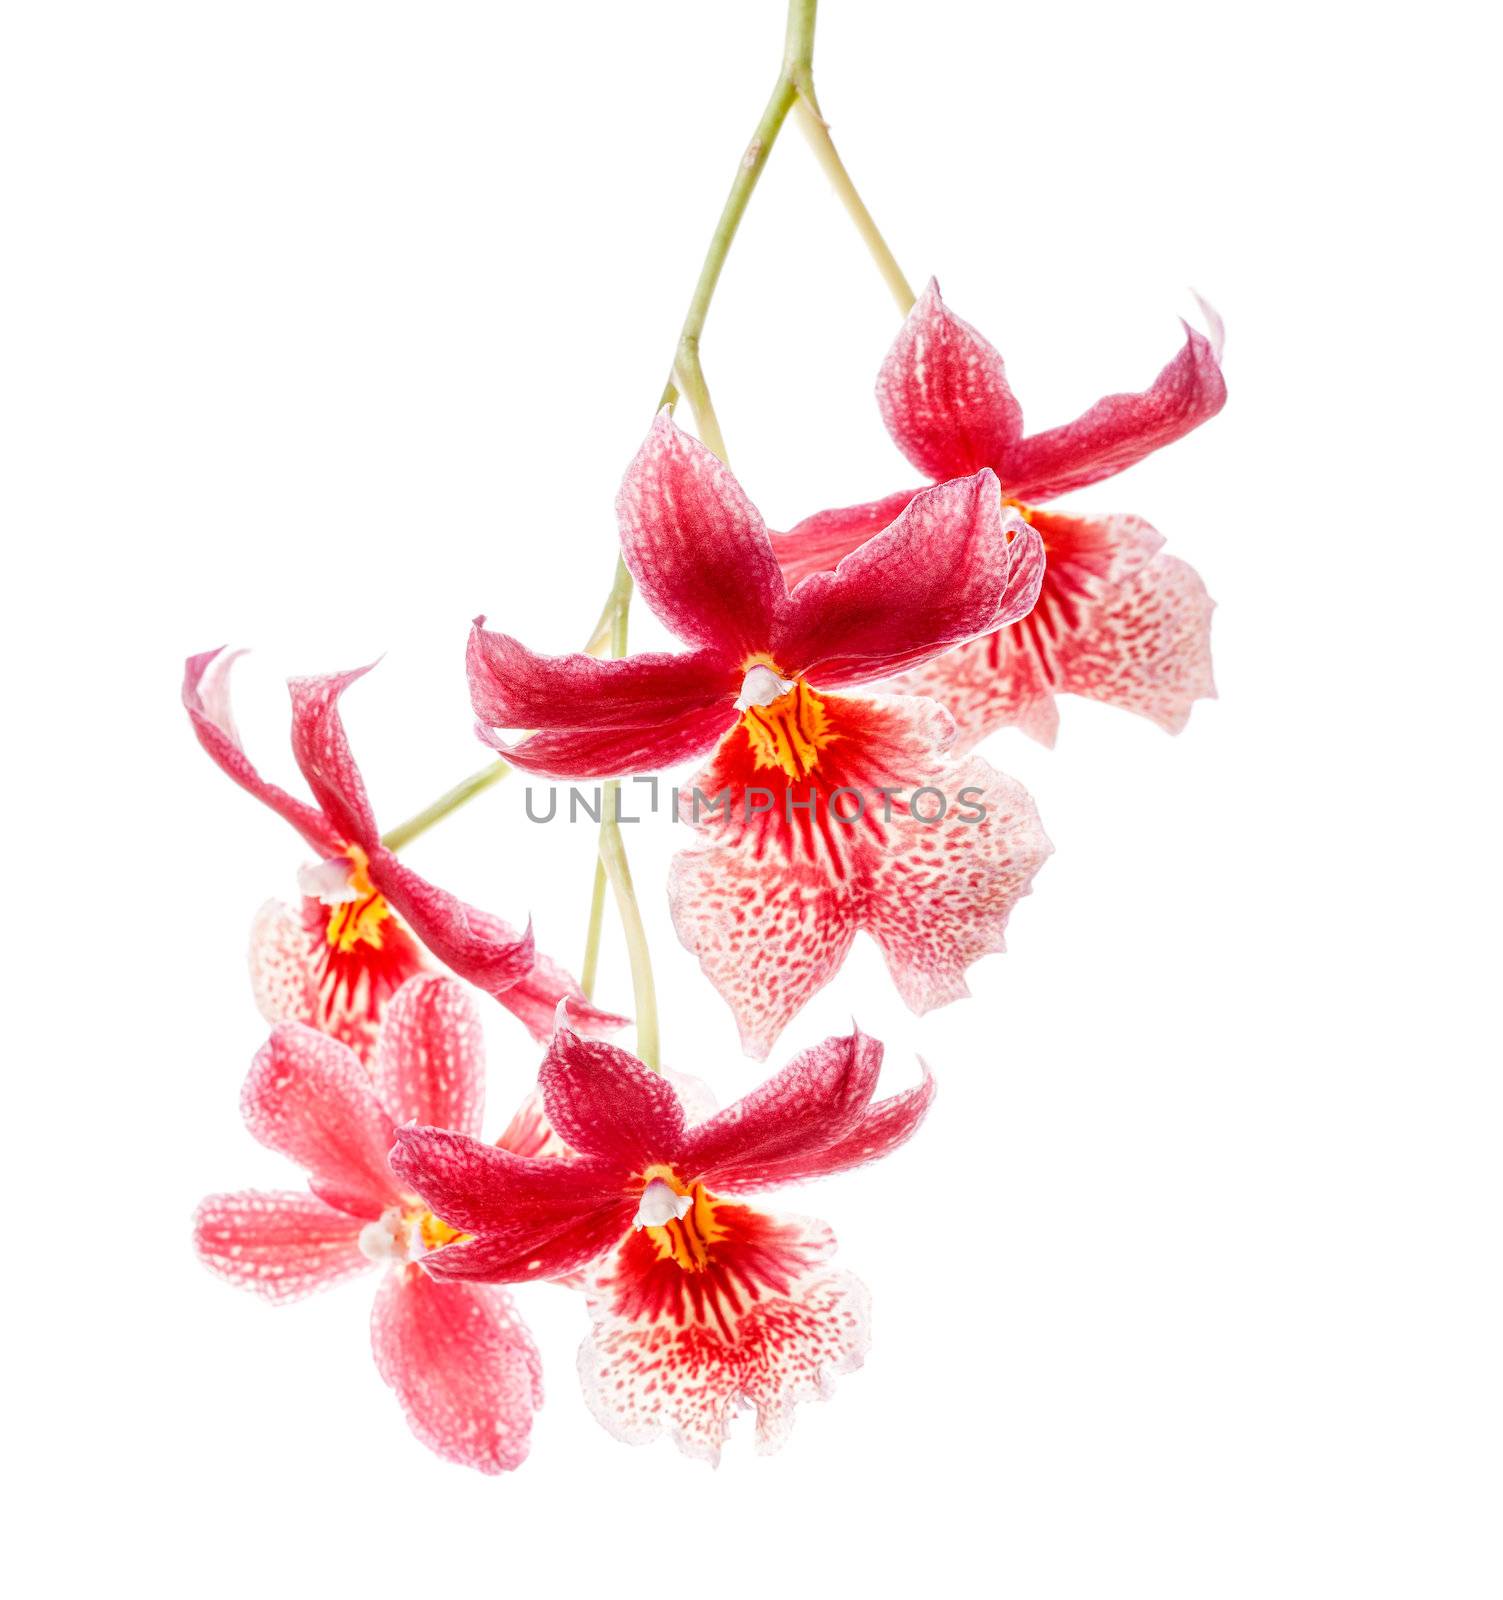 orchid isolated on white by palinchak